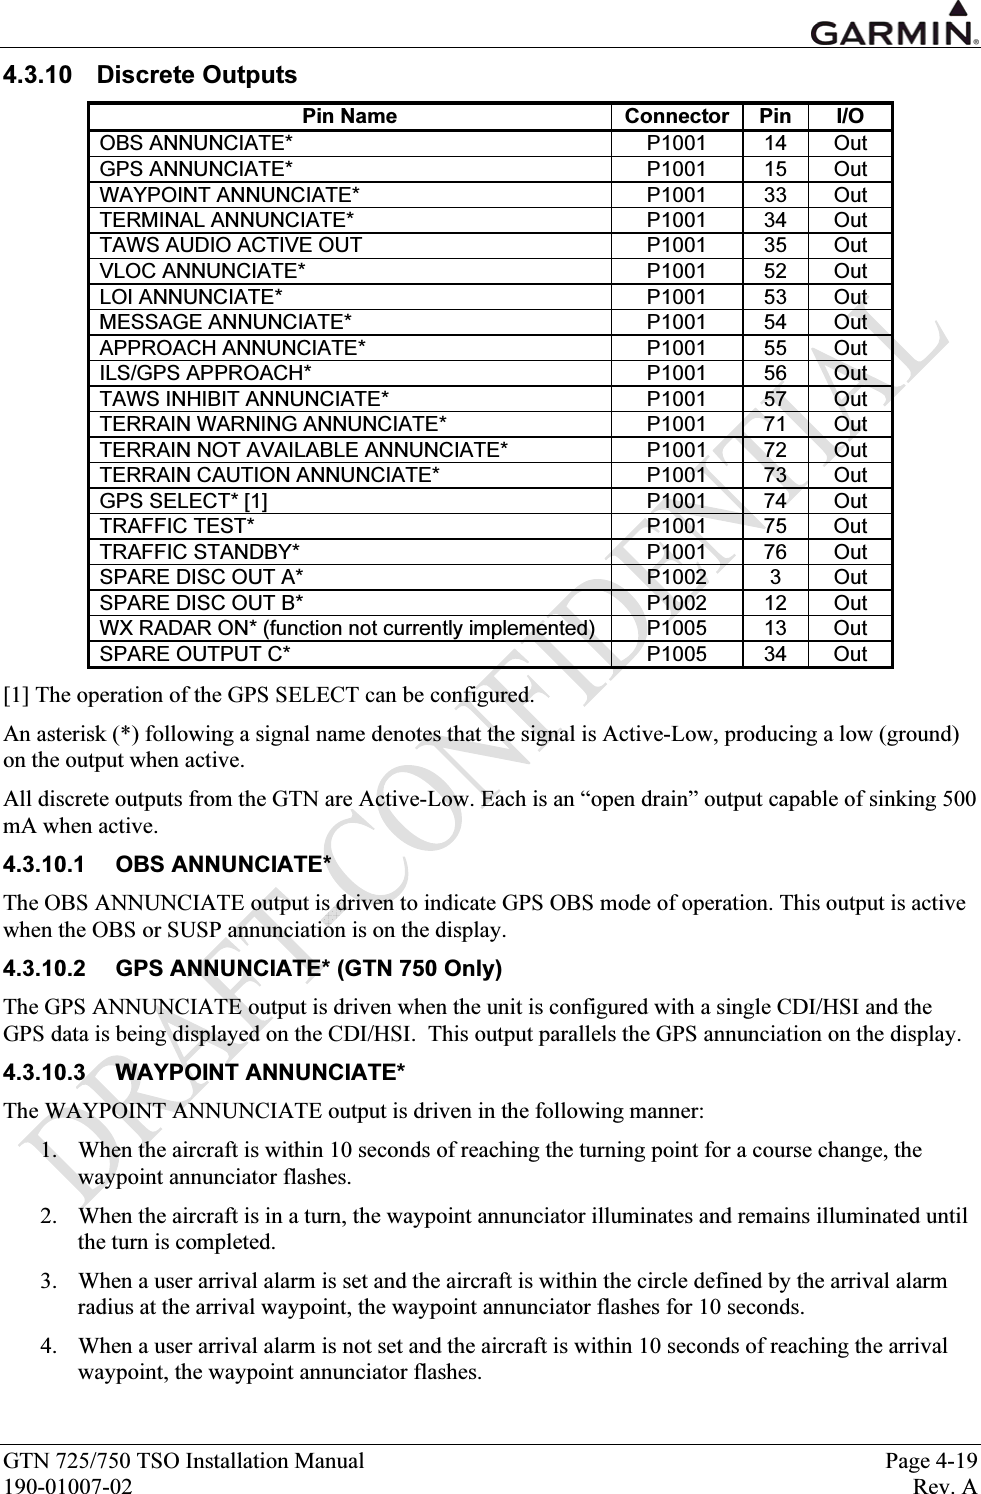  GTN 725/750 TSO Installation Manual  Page 4-19 190-01007-02  Rev. A 4.3.10 Discrete Outputs Pin Name  Connector  Pin  I/O OBS ANNUNCIATE*  P1001  14  Out GPS ANNUNCIATE*  P1001  15  Out WAYPOINT ANNUNCIATE*  P1001  33  Out TERMINAL ANNUNCIATE*  P1001  34  Out TAWS AUDIO ACTIVE OUT  P1001  35  Out VLOC ANNUNCIATE*  P1001  52  Out LOI ANNUNCIATE*  P1001  53  Out MESSAGE ANNUNCIATE*  P1001  54  Out APPROACH ANNUNCIATE*  P1001  55  Out ILS/GPS APPROACH*  P1001  56  Out TAWS INHIBIT ANNUNCIATE*  P1001  57  Out TERRAIN WARNING ANNUNCIATE*  P1001  71  Out TERRAIN NOT AVAILABLE ANNUNCIATE*  P1001  72  Out TERRAIN CAUTION ANNUNCIATE*  P1001  73  Out GPS SELECT* [1]  P1001  74  Out TRAFFIC TEST*  P1001  75  Out TRAFFIC STANDBY*  P1001  76  Out SPARE DISC OUT A*  P1002  3  Out SPARE DISC OUT B*  P1002  12  Out WX RADAR ON* (function not currently implemented)  P1005  13  Out SPARE OUTPUT C*  P1005  34  Out [1] The operation of the GPS SELECT can be configured.  An asterisk (*) following a signal name denotes that the signal is Active-Low, producing a low (ground) on the output when active.  All discrete outputs from the GTN are Active-Low. Each is an “open drain” output capable of sinking 500 mA when active. 4.3.10.1 OBS ANNUNCIATE* The OBS ANNUNCIATE output is driven to indicate GPS OBS mode of operation. This output is active when the OBS or SUSP annunciation is on the display. 4.3.10.2  GPS ANNUNCIATE* (GTN 750 Only) The GPS ANNUNCIATE output is driven when the unit is configured with a single CDI/HSI and the GPS data is being displayed on the CDI/HSI.  This output parallels the GPS annunciation on the display. 4.3.10.3 WAYPOINT ANNUNCIATE* The WAYPOINT ANNUNCIATE output is driven in the following manner: 1. When the aircraft is within 10 seconds of reaching the turning point for a course change, the waypoint annunciator flashes. 2. When the aircraft is in a turn, the waypoint annunciator illuminates and remains illuminated until the turn is completed. 3. When a user arrival alarm is set and the aircraft is within the circle defined by the arrival alarm radius at the arrival waypoint, the waypoint annunciator flashes for 10 seconds. 4. When a user arrival alarm is not set and the aircraft is within 10 seconds of reaching the arrival waypoint, the waypoint annunciator flashes. 